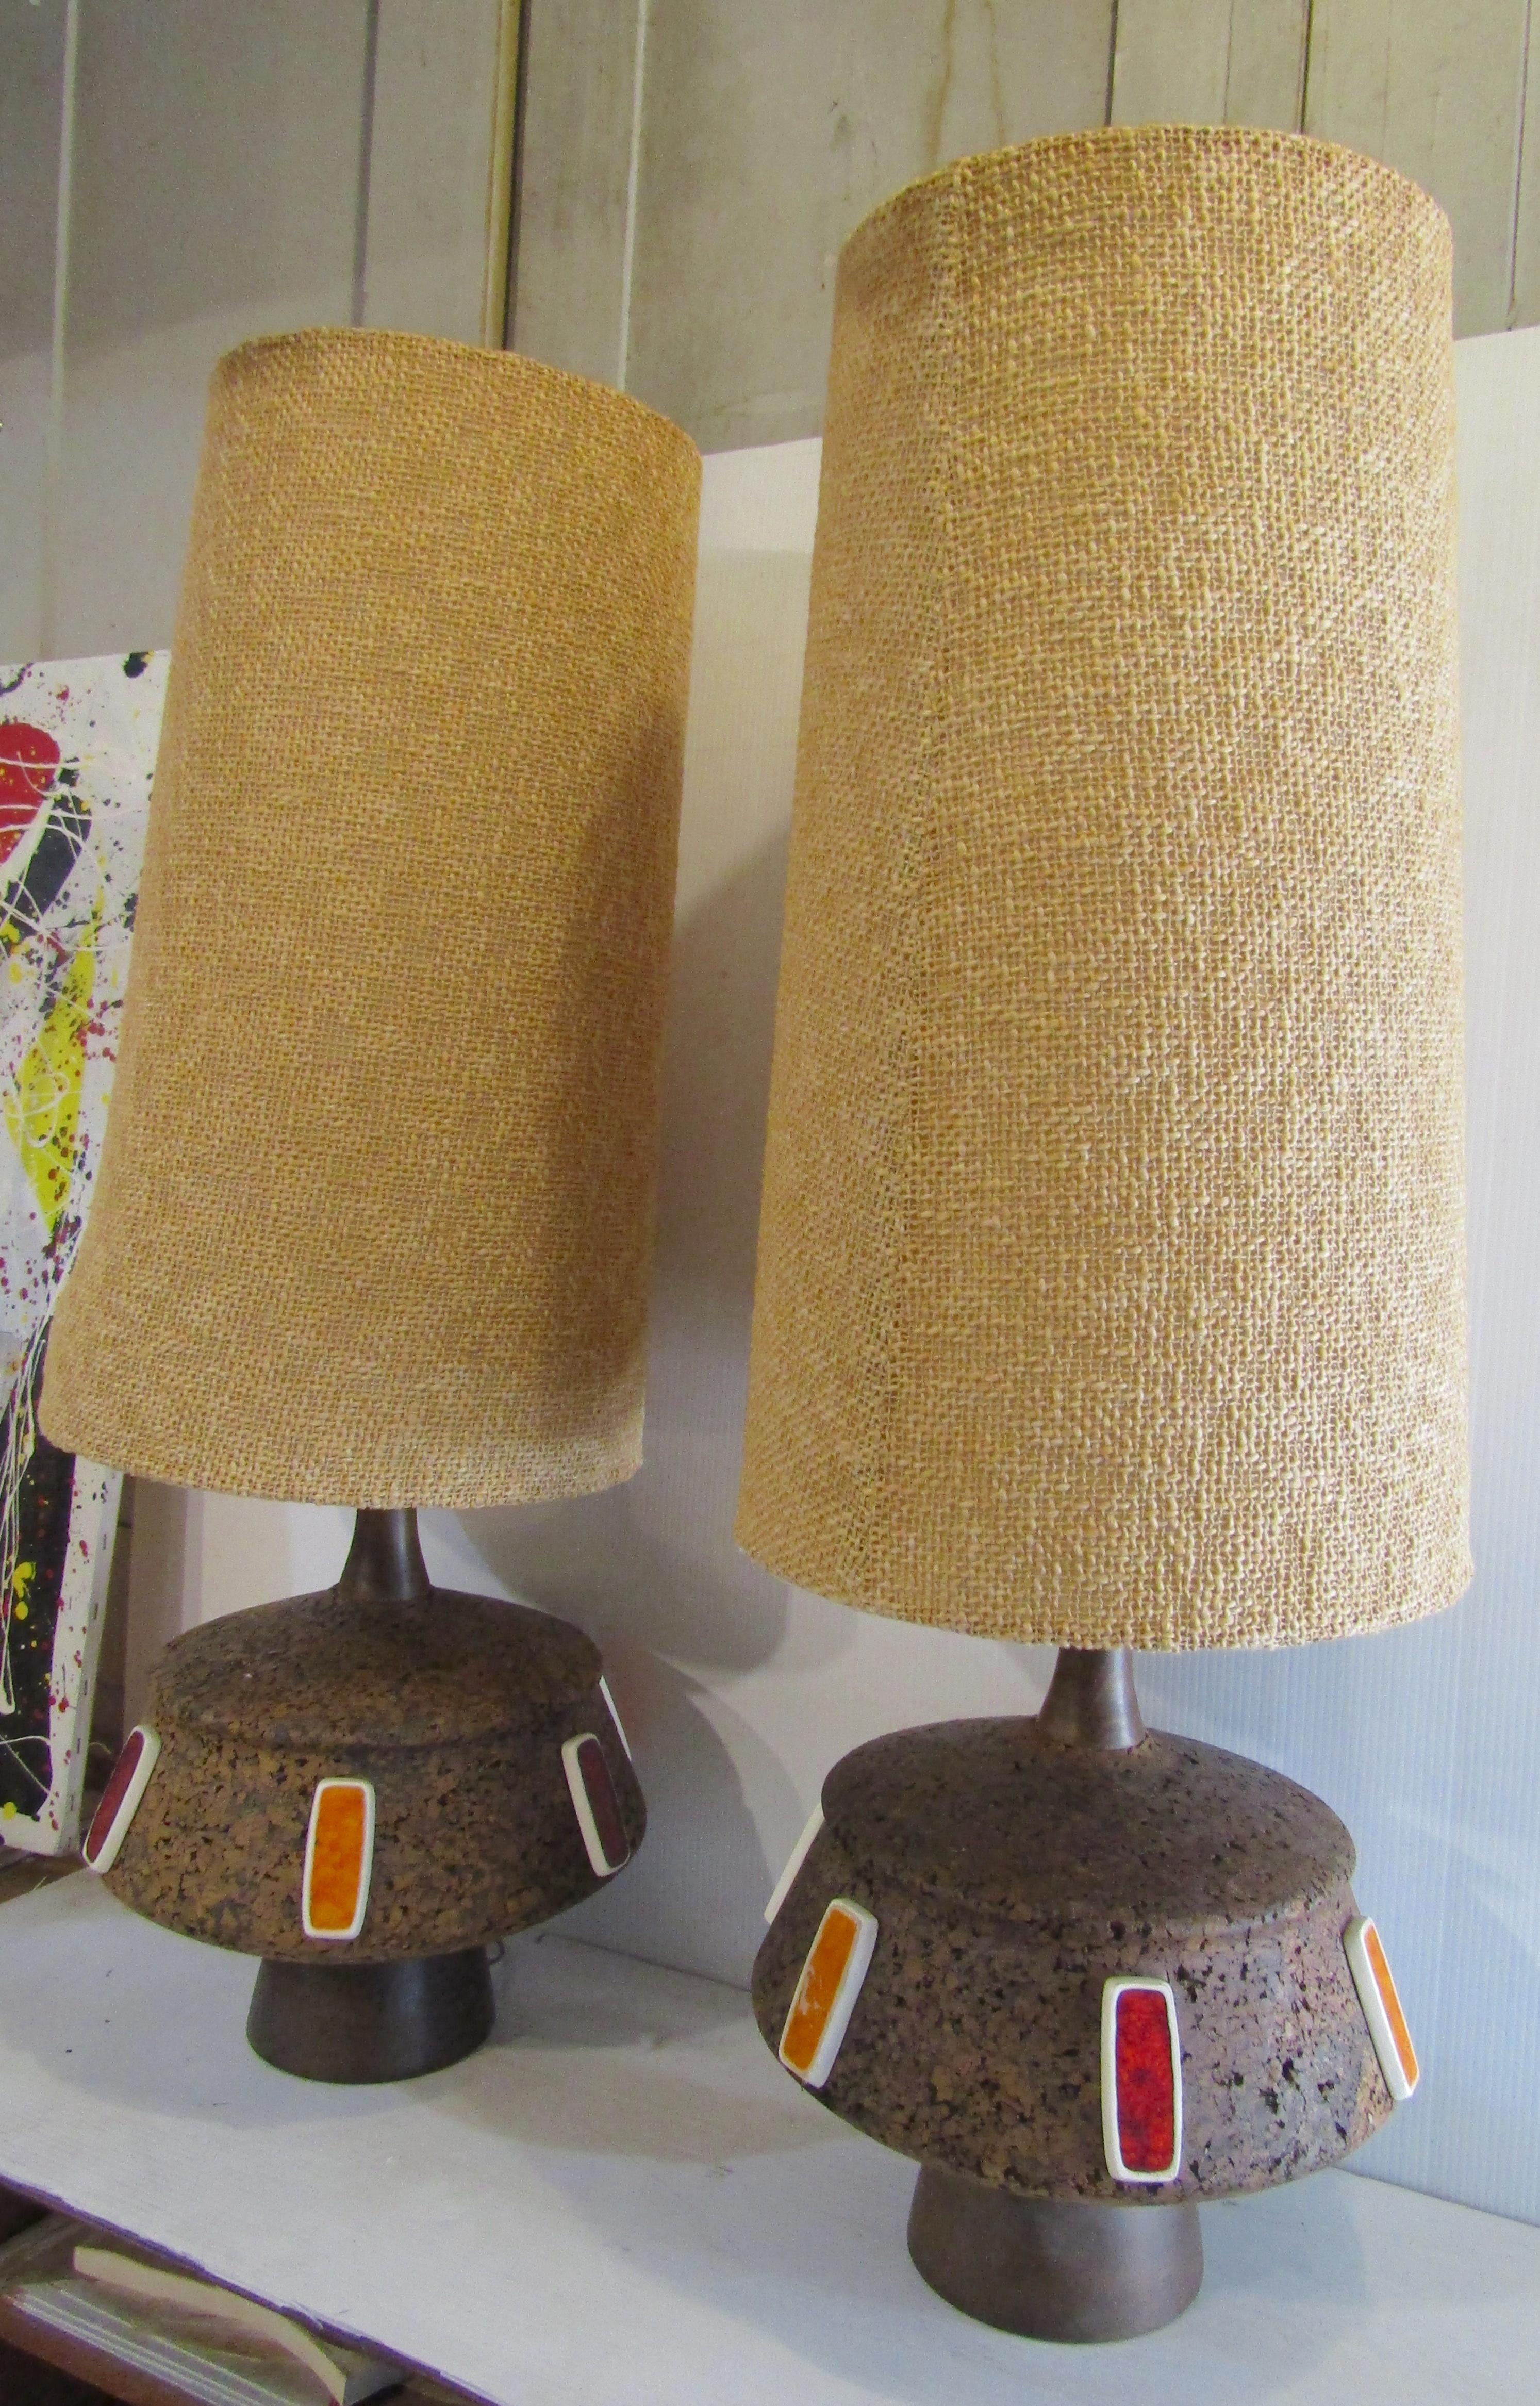 Mid-Century Modern cork lamps with original shades and decorative colored ceramics.
(Please confirm item location - NY or NJ - with dealer).
 